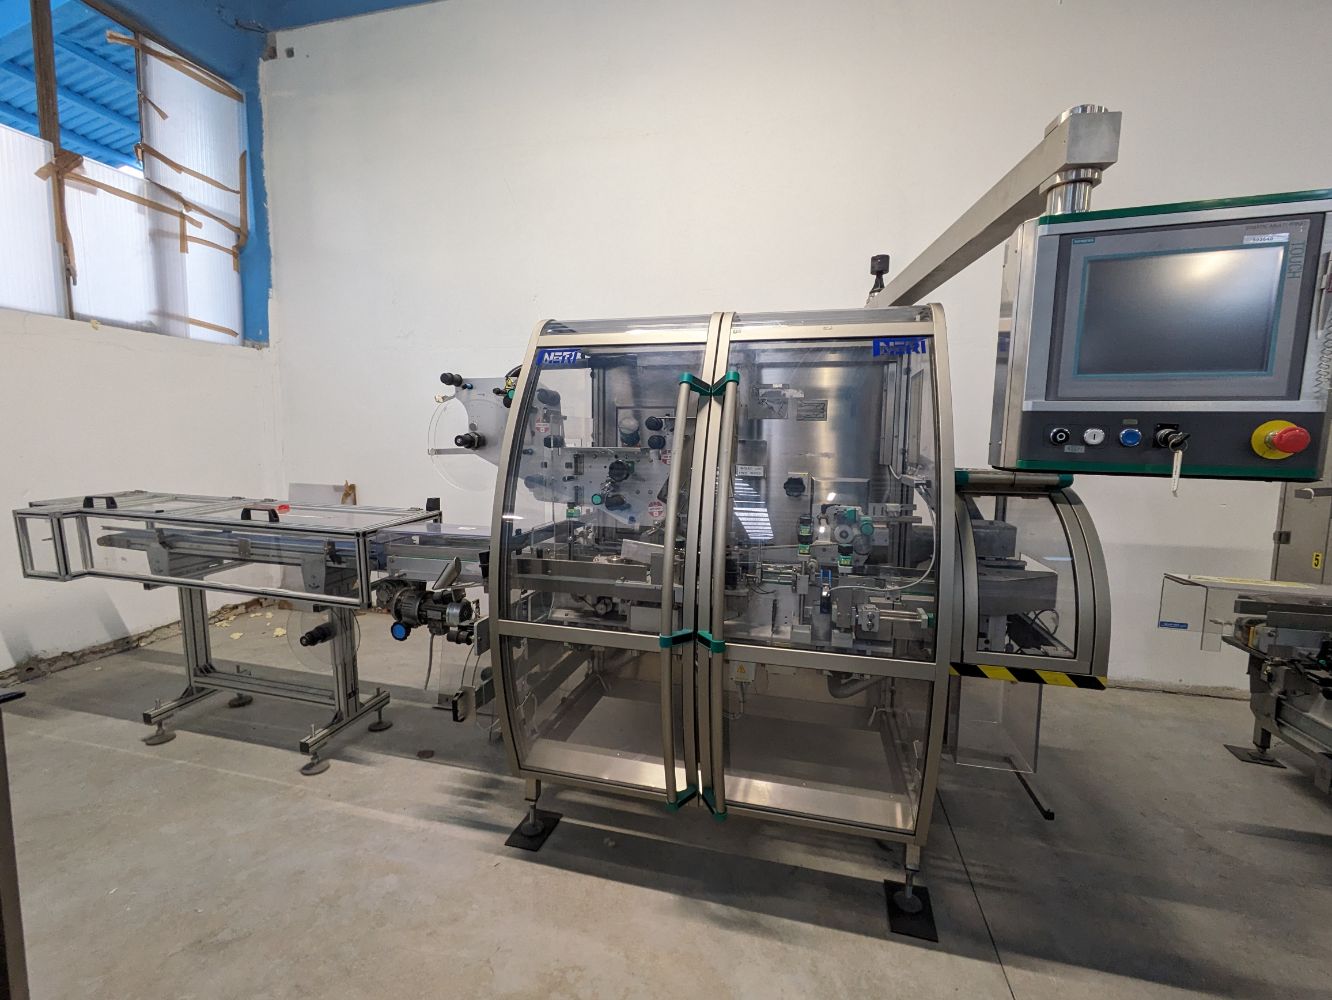 Unique Opportunity in Italy: Exclusive Auction Featuring High-End Packaging and Pharmaceutical Processing Equipment